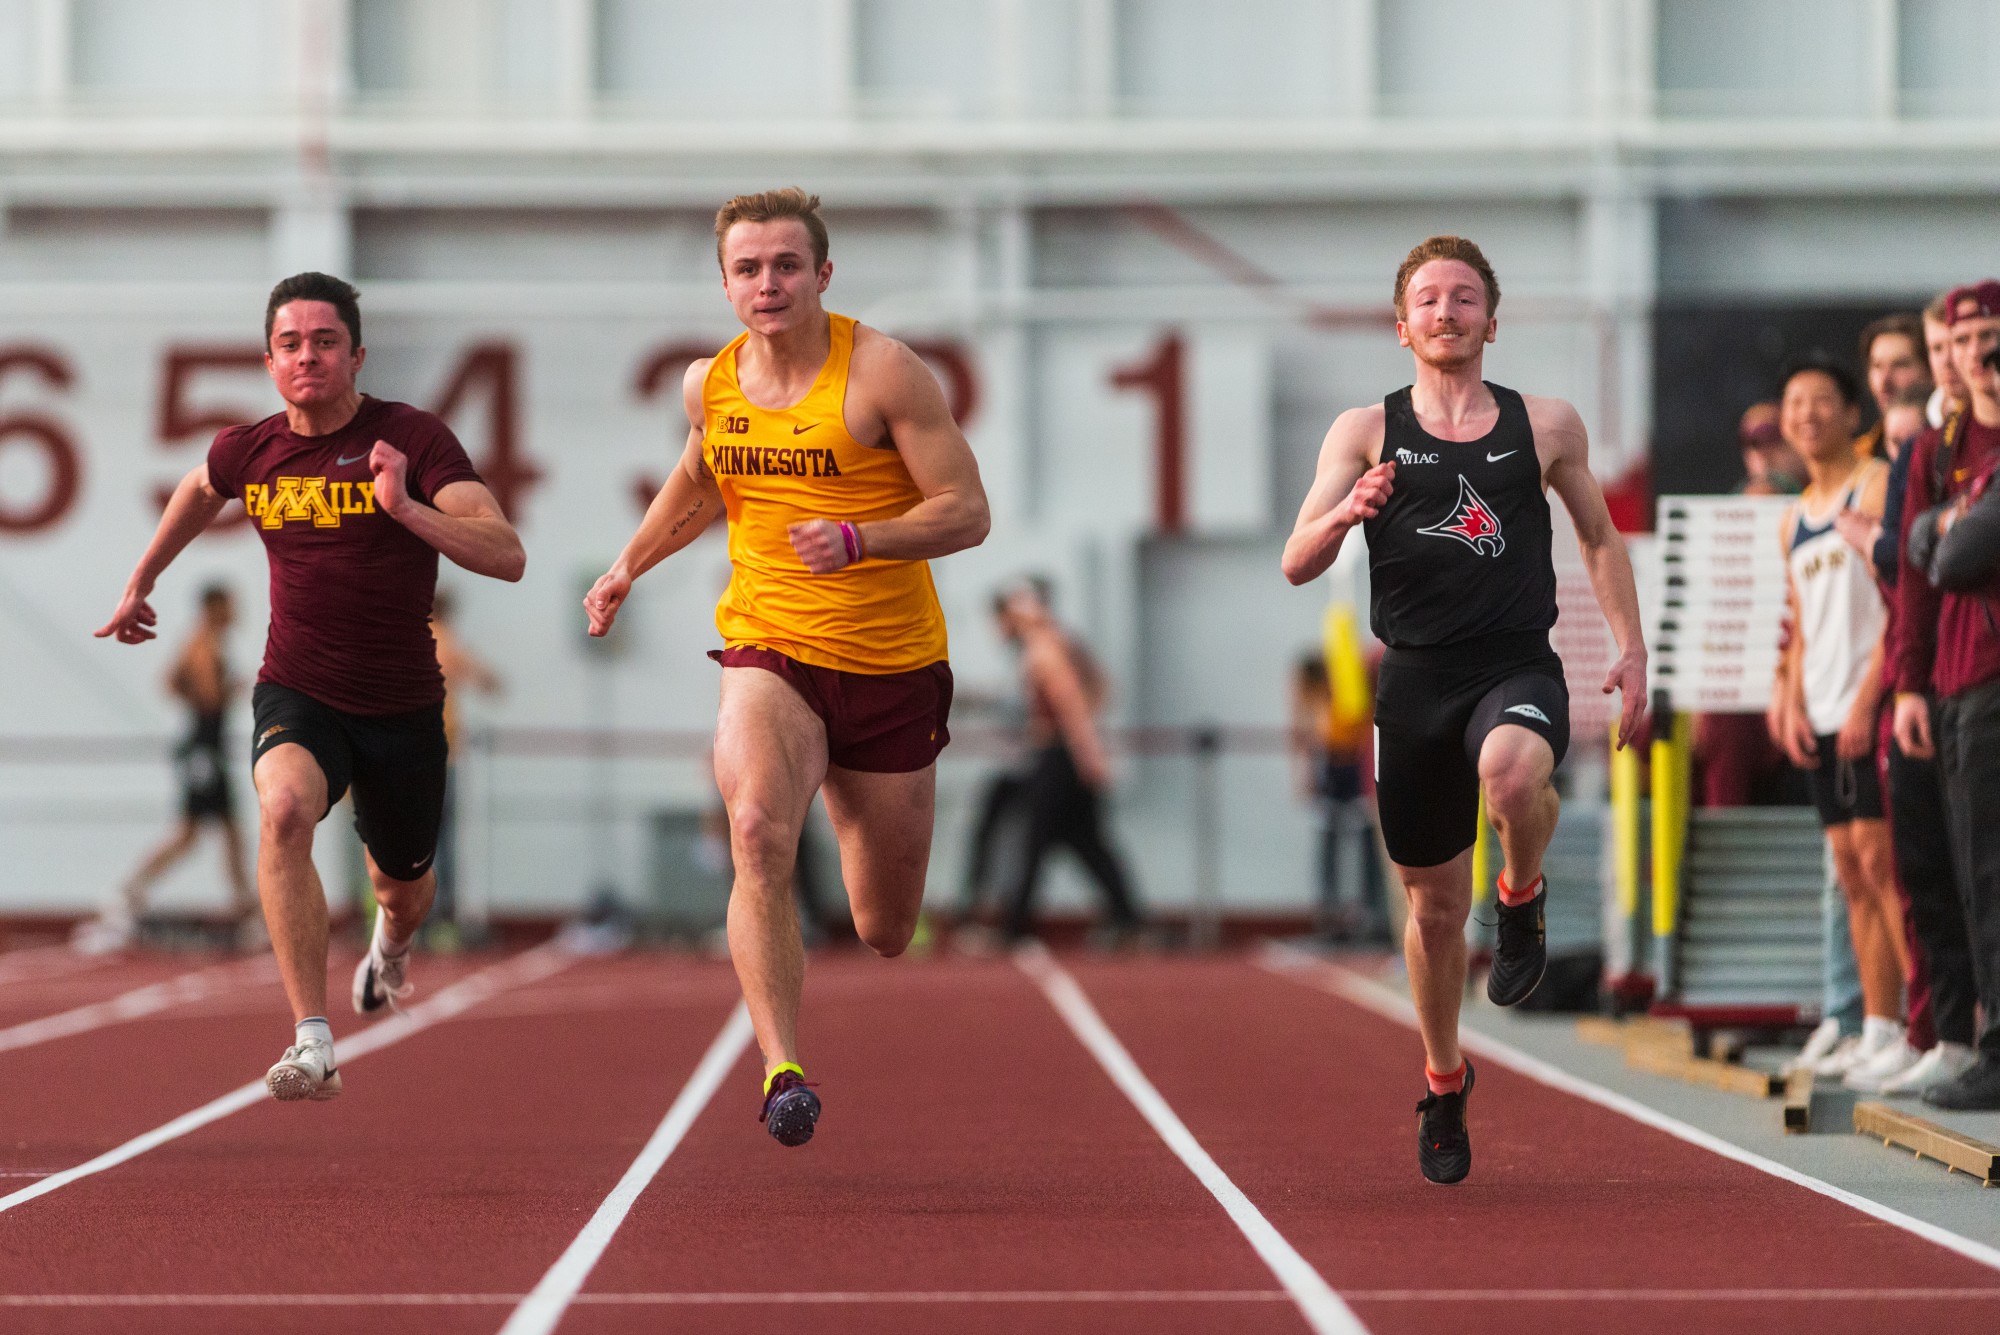 Gophers Junior Nate Hoglund competes in the sixty meter dash at the Minnesota Cold Classic at the University of Minnesota Fieldhouse on Friday, Feb. 21.